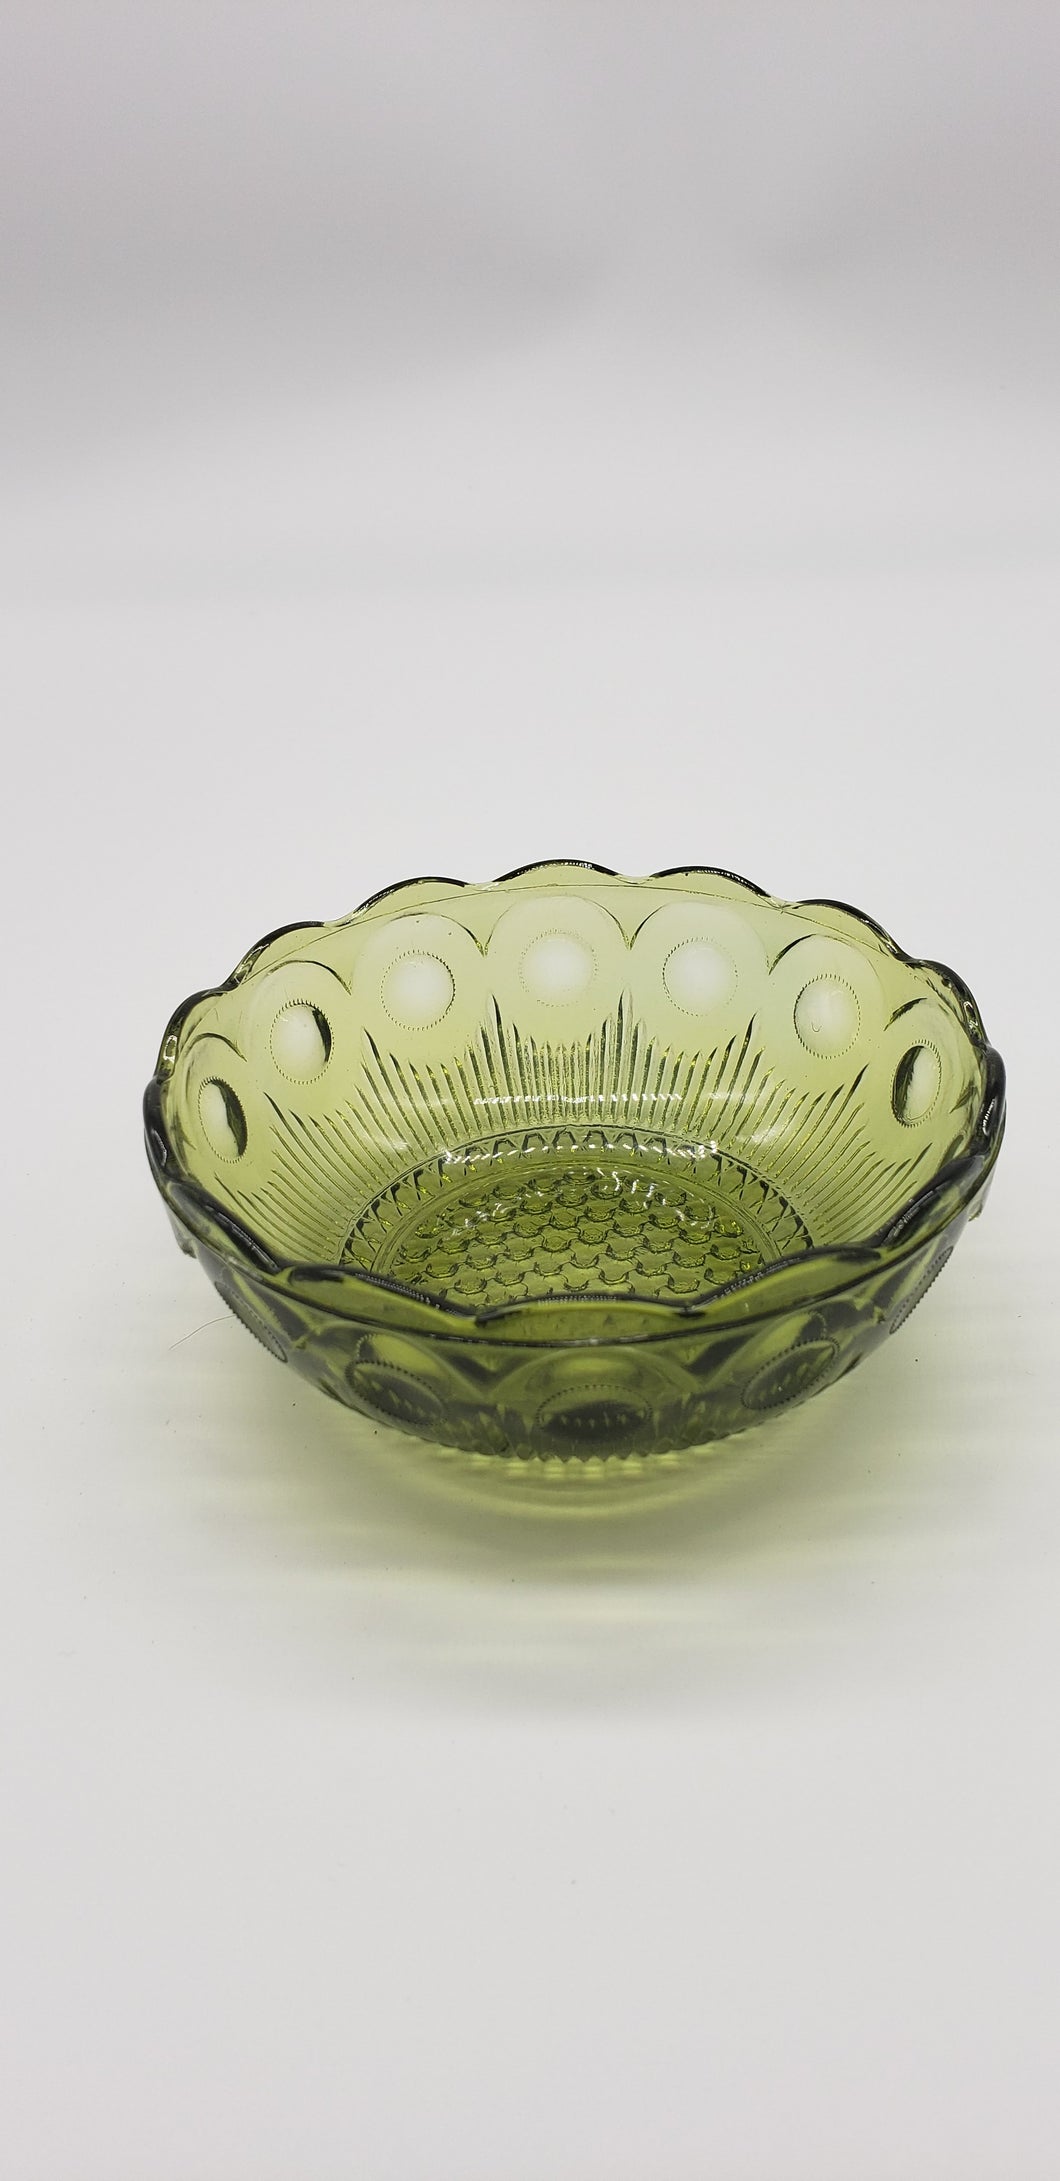 Green Glass Berry Bowl, Jewelry, or Trinkets - Circle pattern and textured bottom